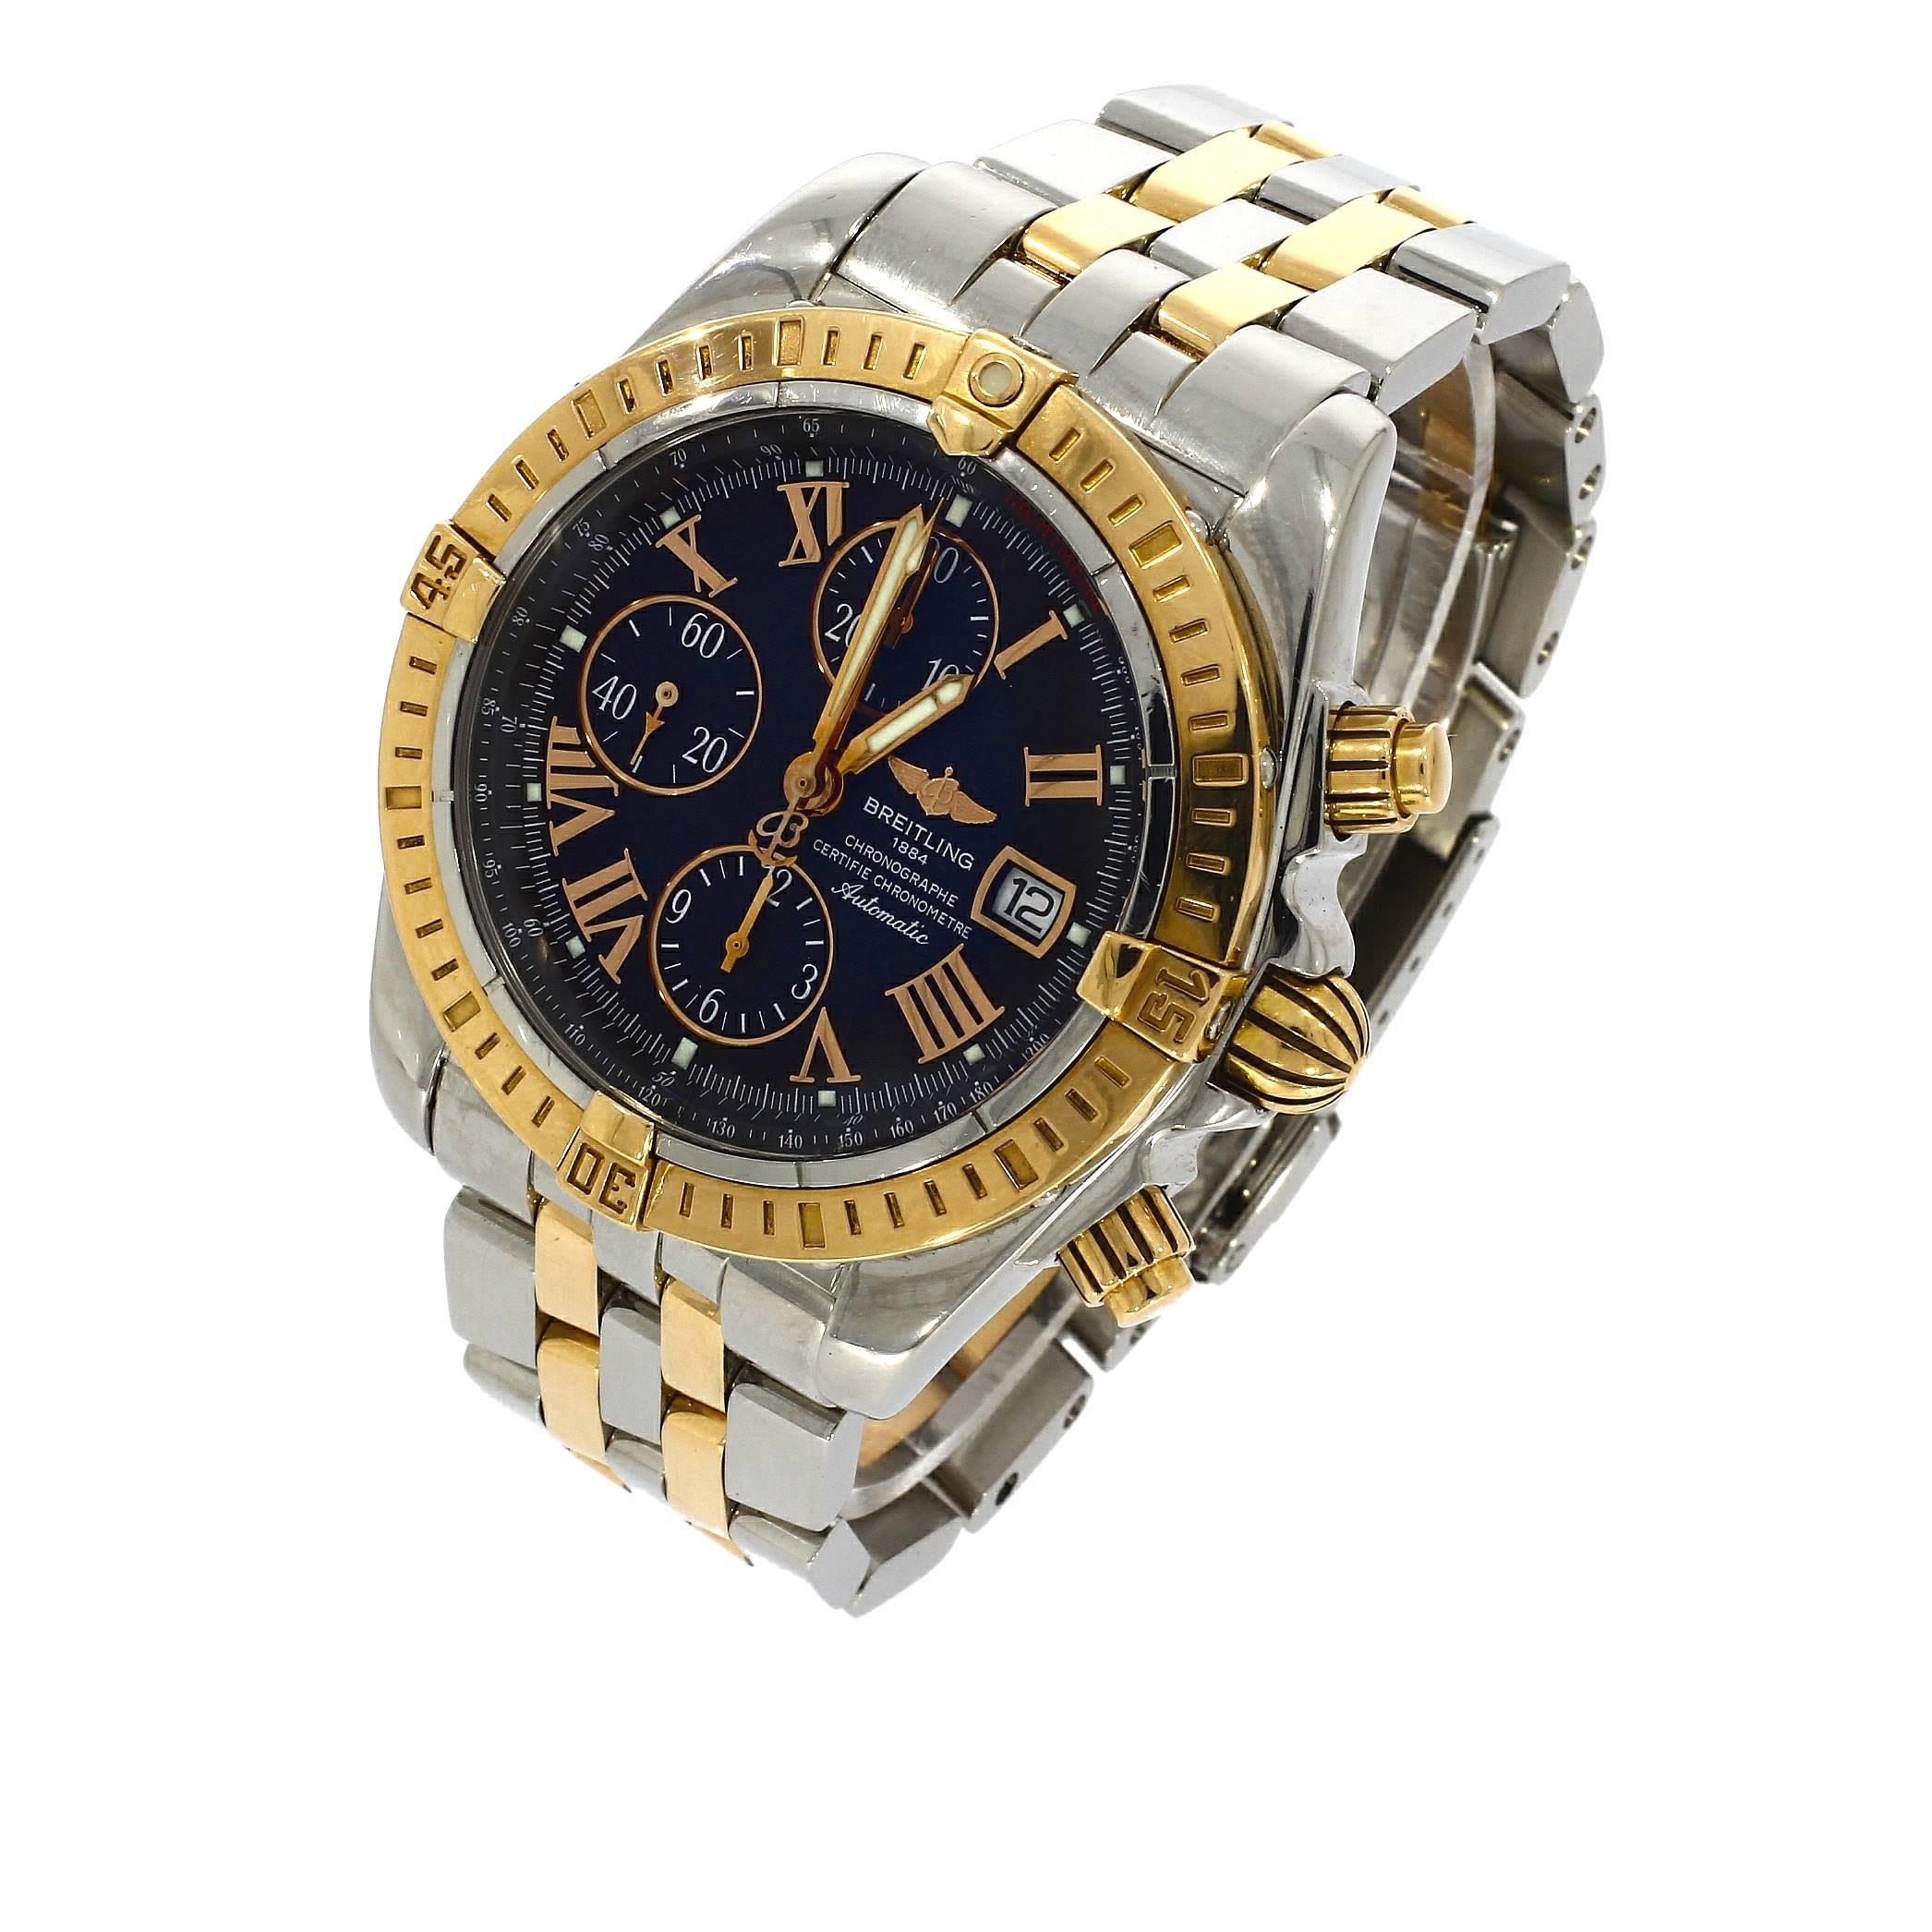 This pre-owned Breitling Chronomat Evolution, It has a 45mm Steel and Rose Gold case. Fitted with a black dial. A signed Breitling rose gold and steel bracelet. With an automatic movement. Circa unknown, the case has a serial reading: 2170XXX

The